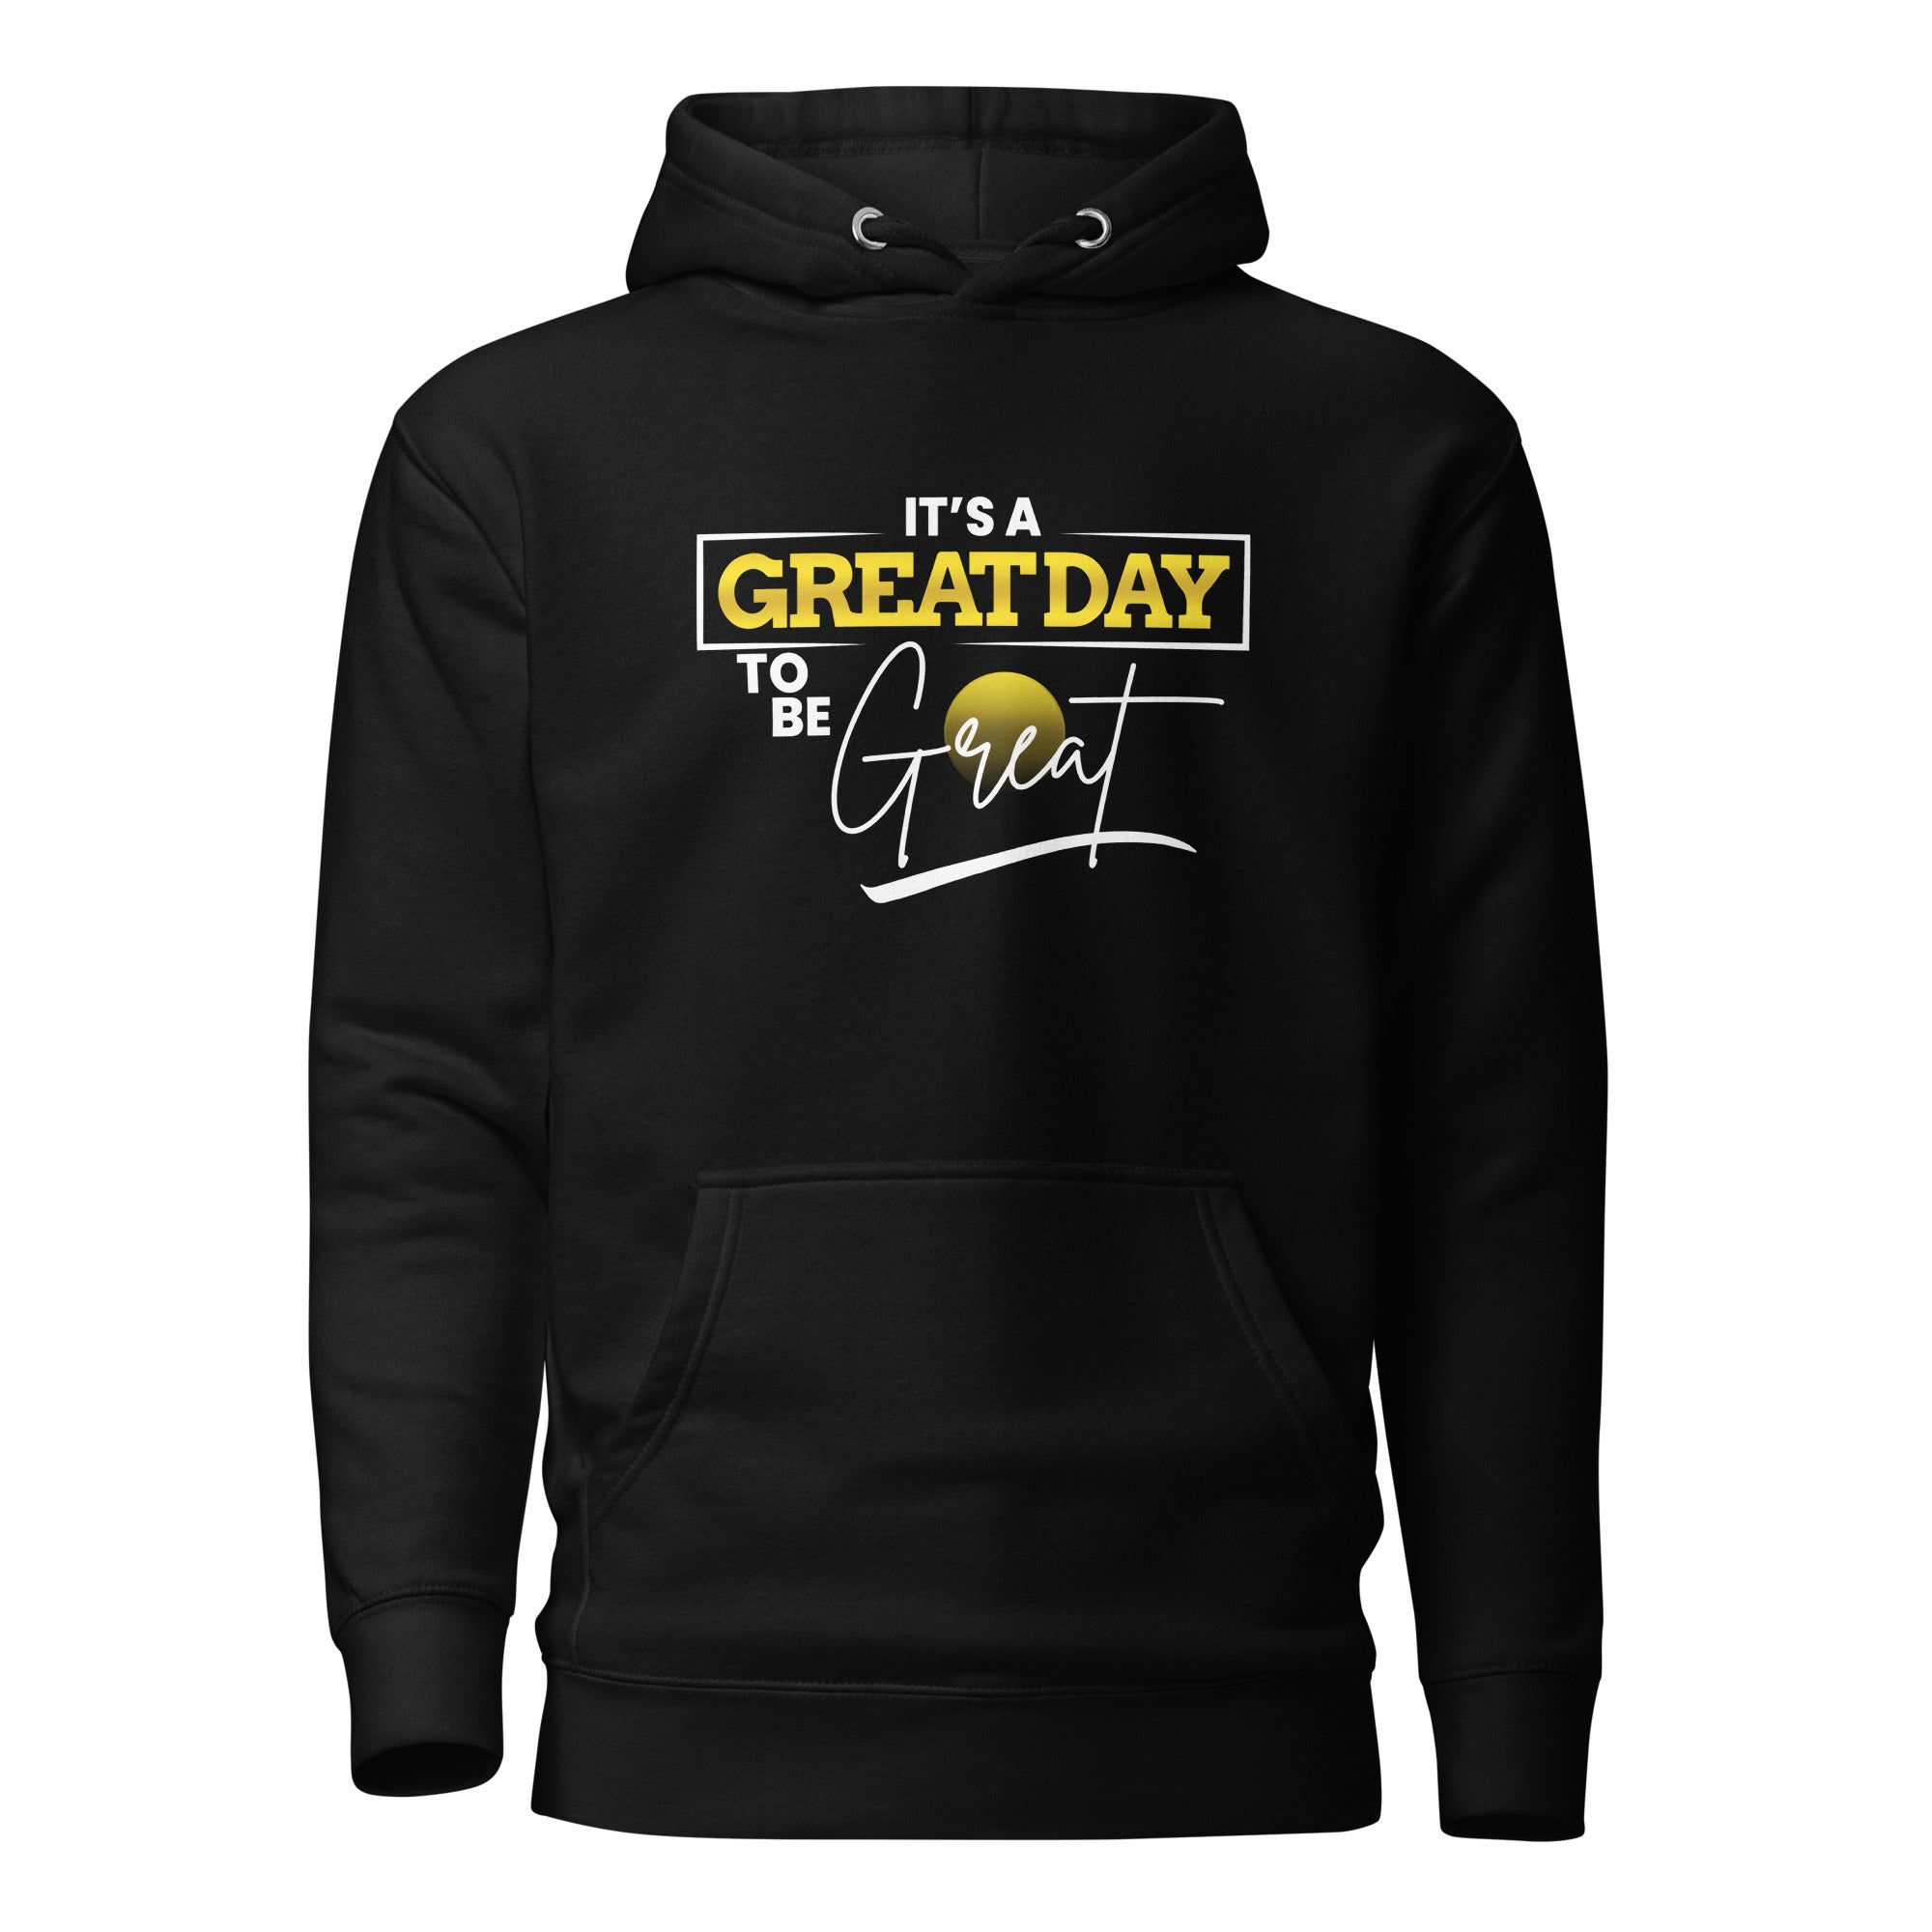 It's A Greatday To Be Great Unisex Hoodie